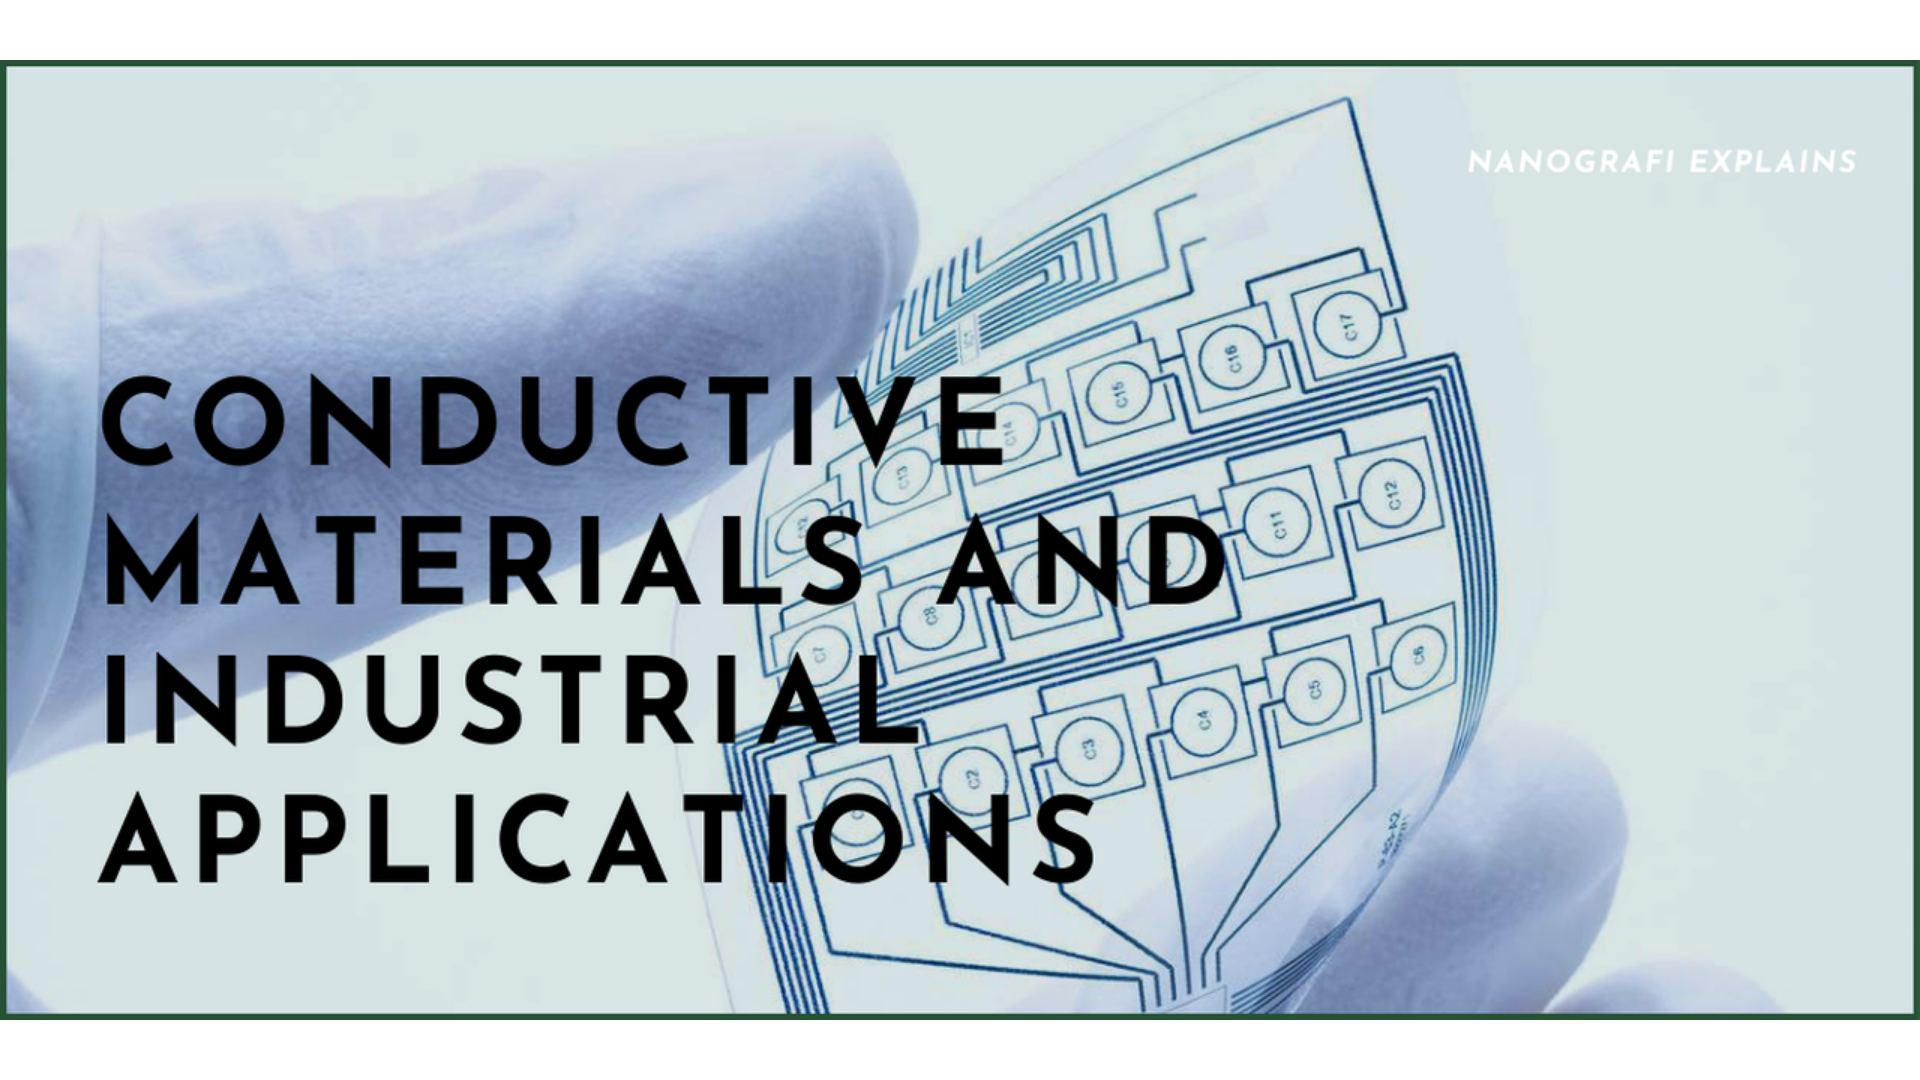 Conductive materials and industrial applications